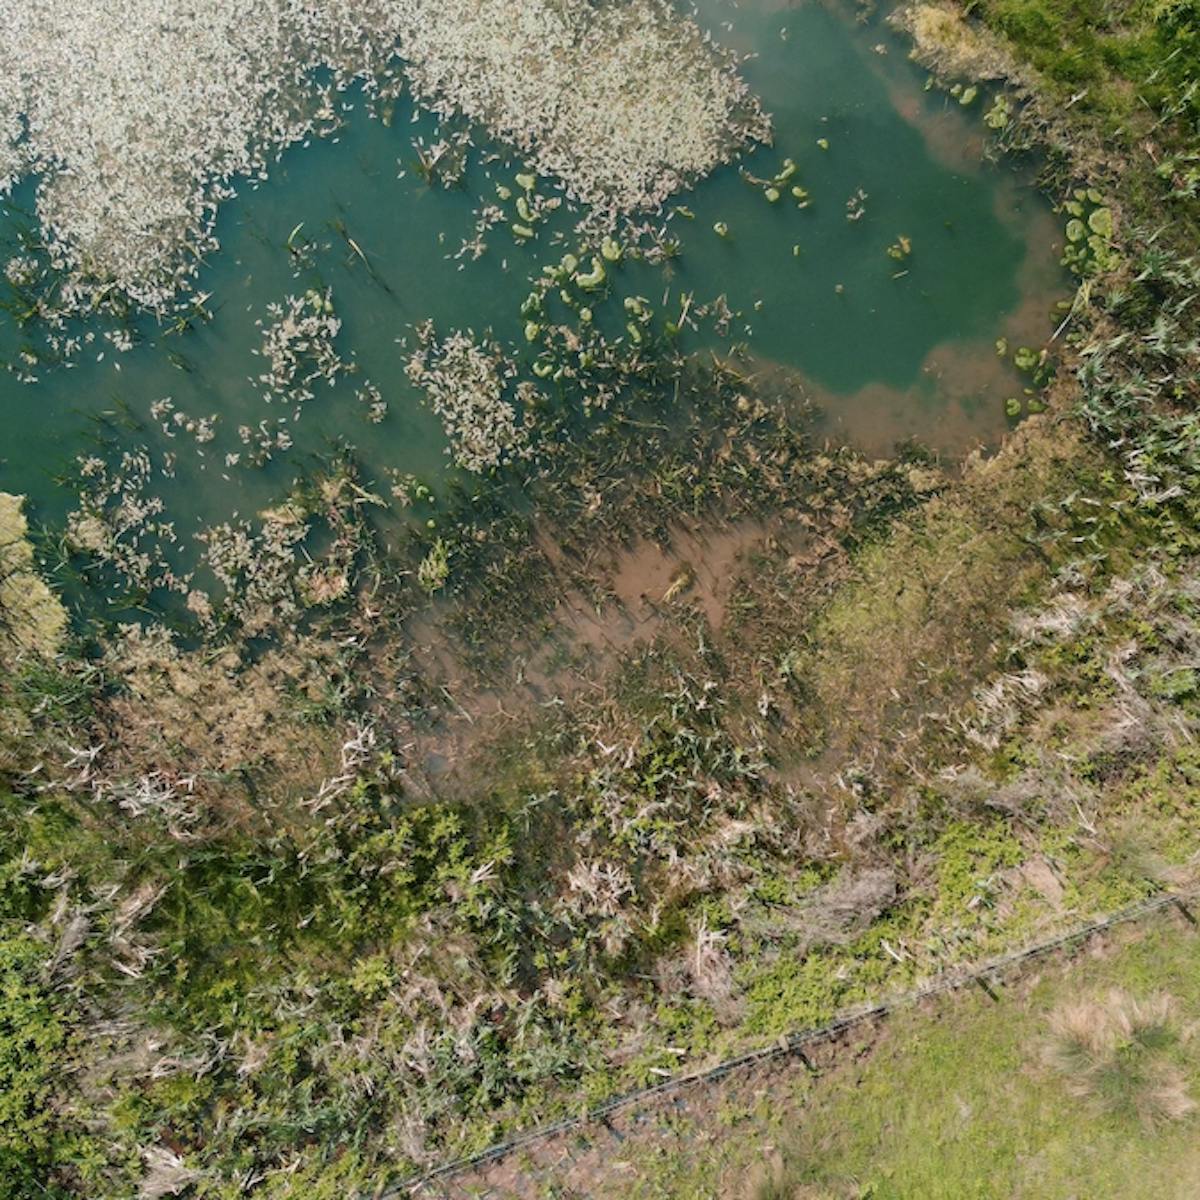 A bird's eye view of a pond in the River Chew catchment